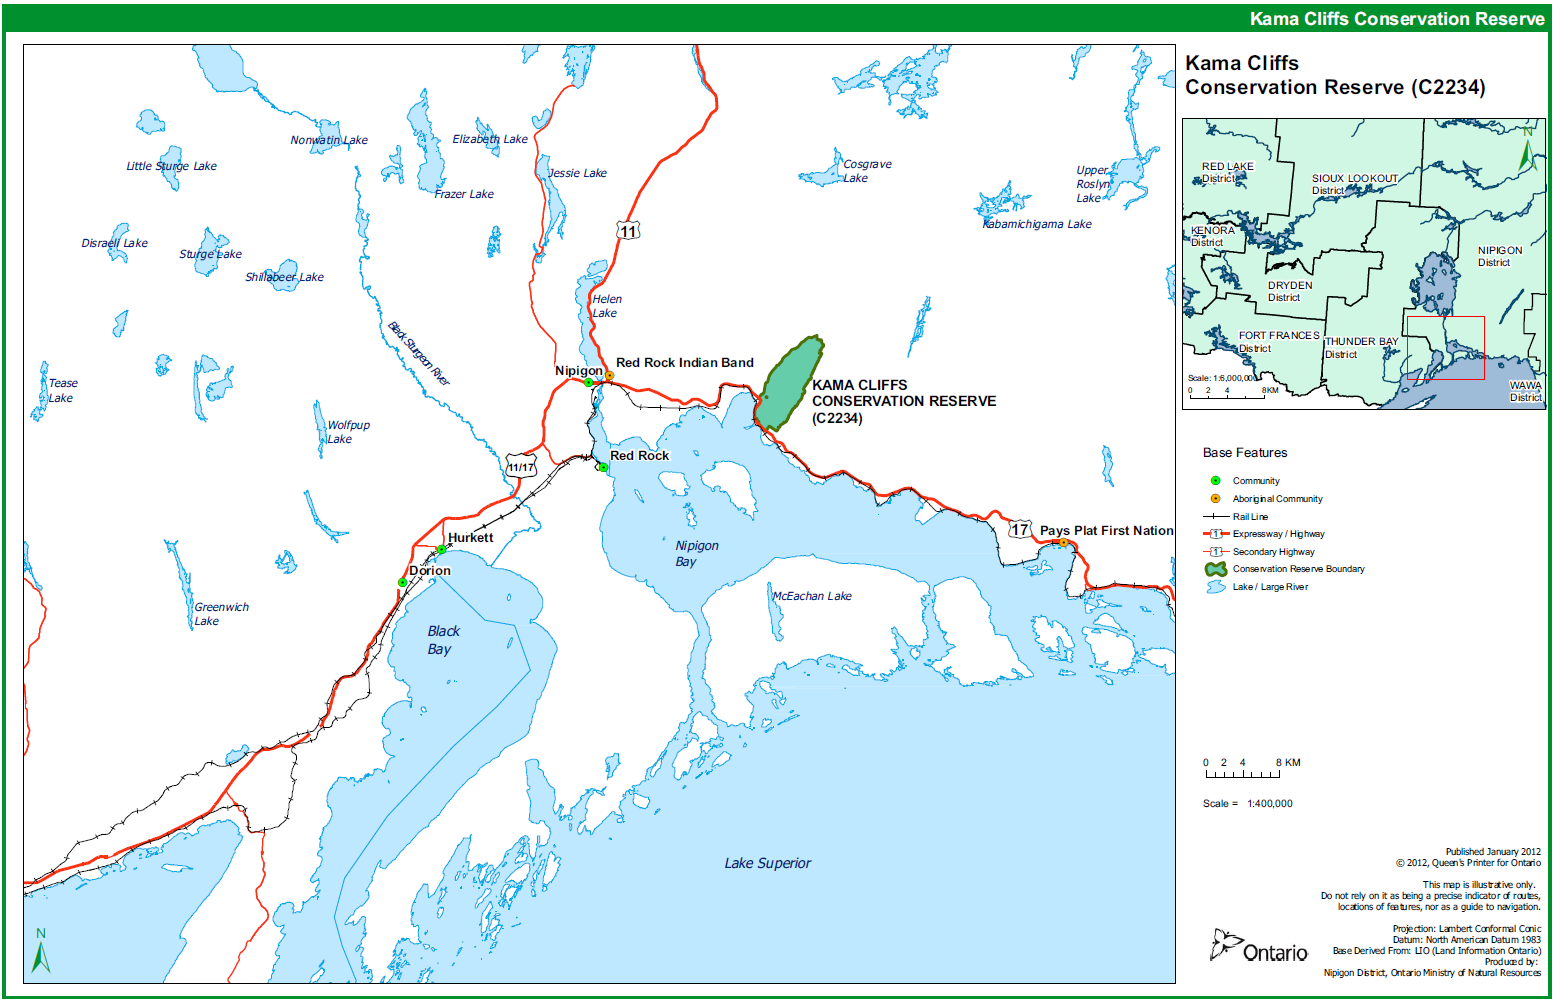 Map that provides regional context for the location of Kama Cliffs conservation reserve.